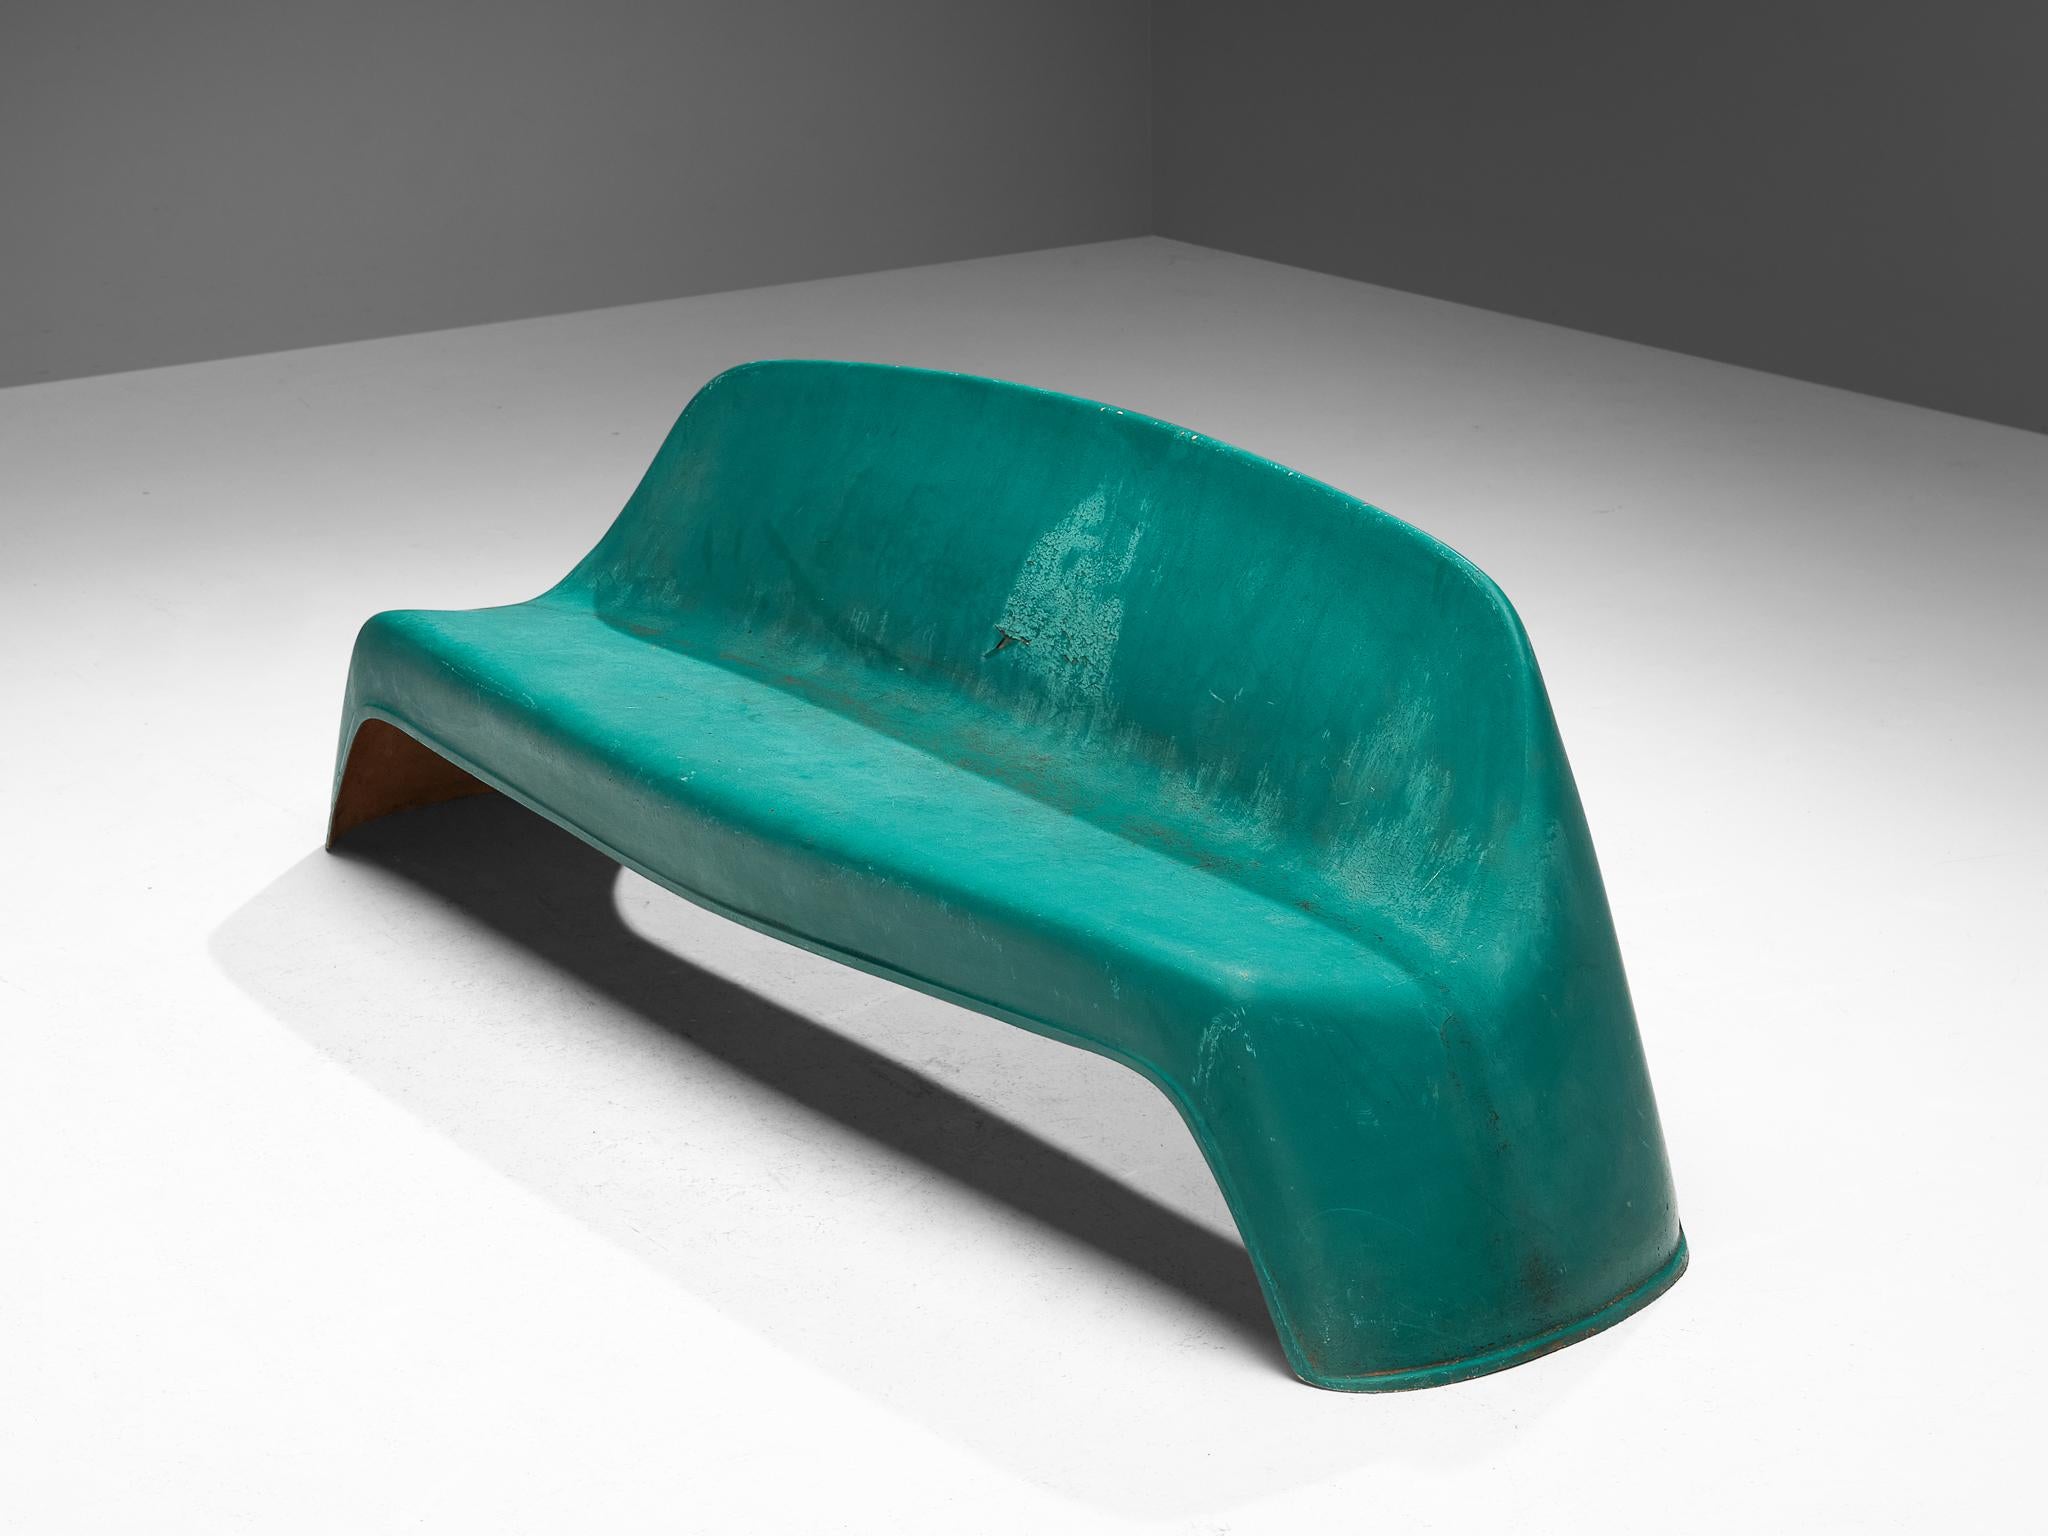 Walter Papst for Wilkhahn, bench, model '1000', fiberglass, Germany, circa 1968

This '1000' garden bench is designed by Walter Papst and features an organic-shaped form executed in a vibrant green-lacquered fiberglass. Owing to its material